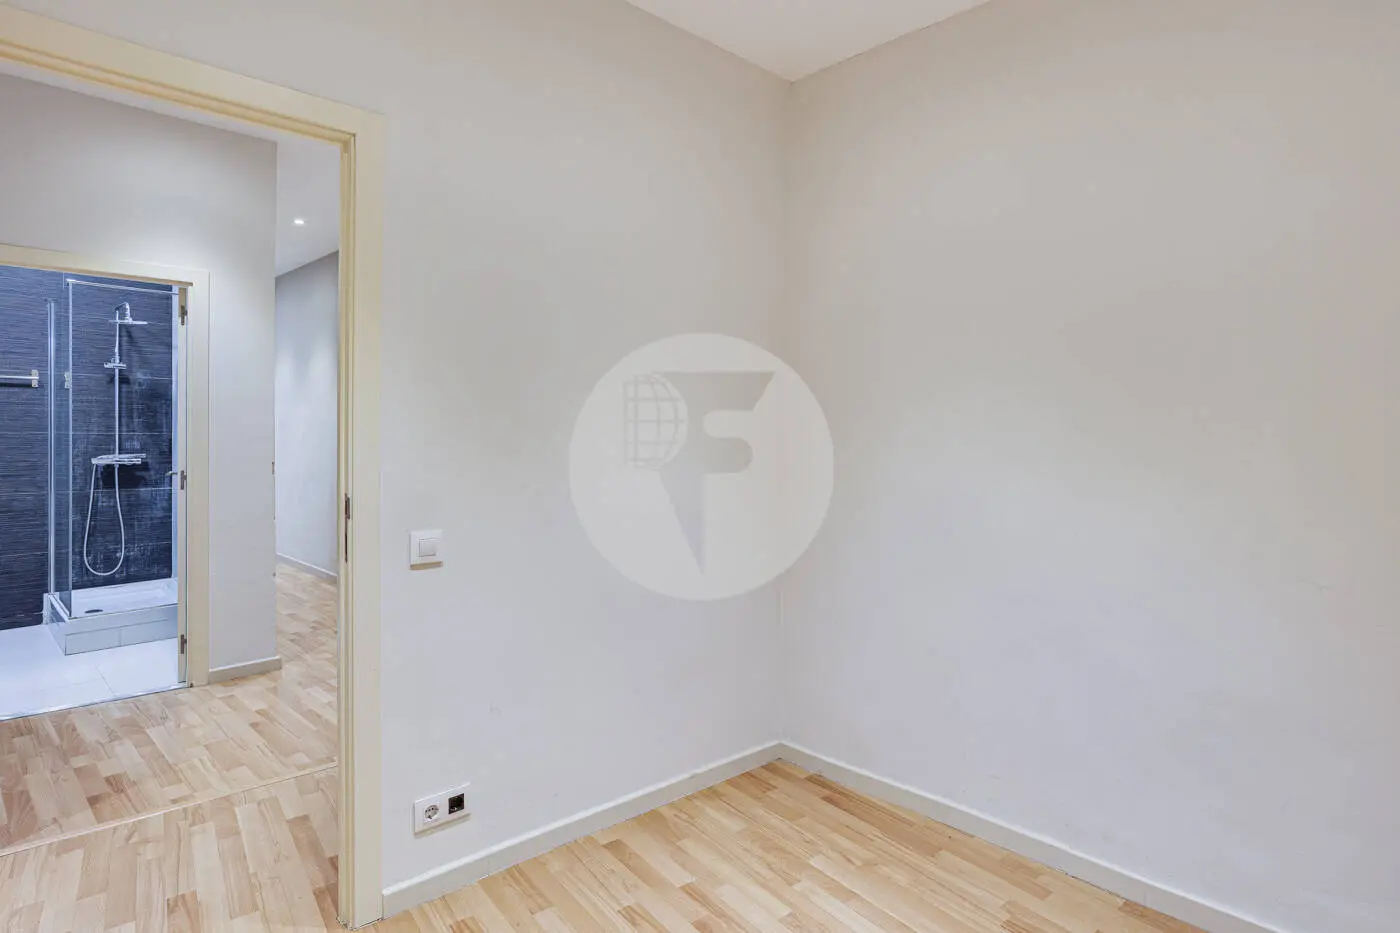 Magnificent apartment for sale next to Pl Universitat of 114m2 according to the land registry, located on Tallers Street in the Ciutat Vella neighborhood of Barcelona 15